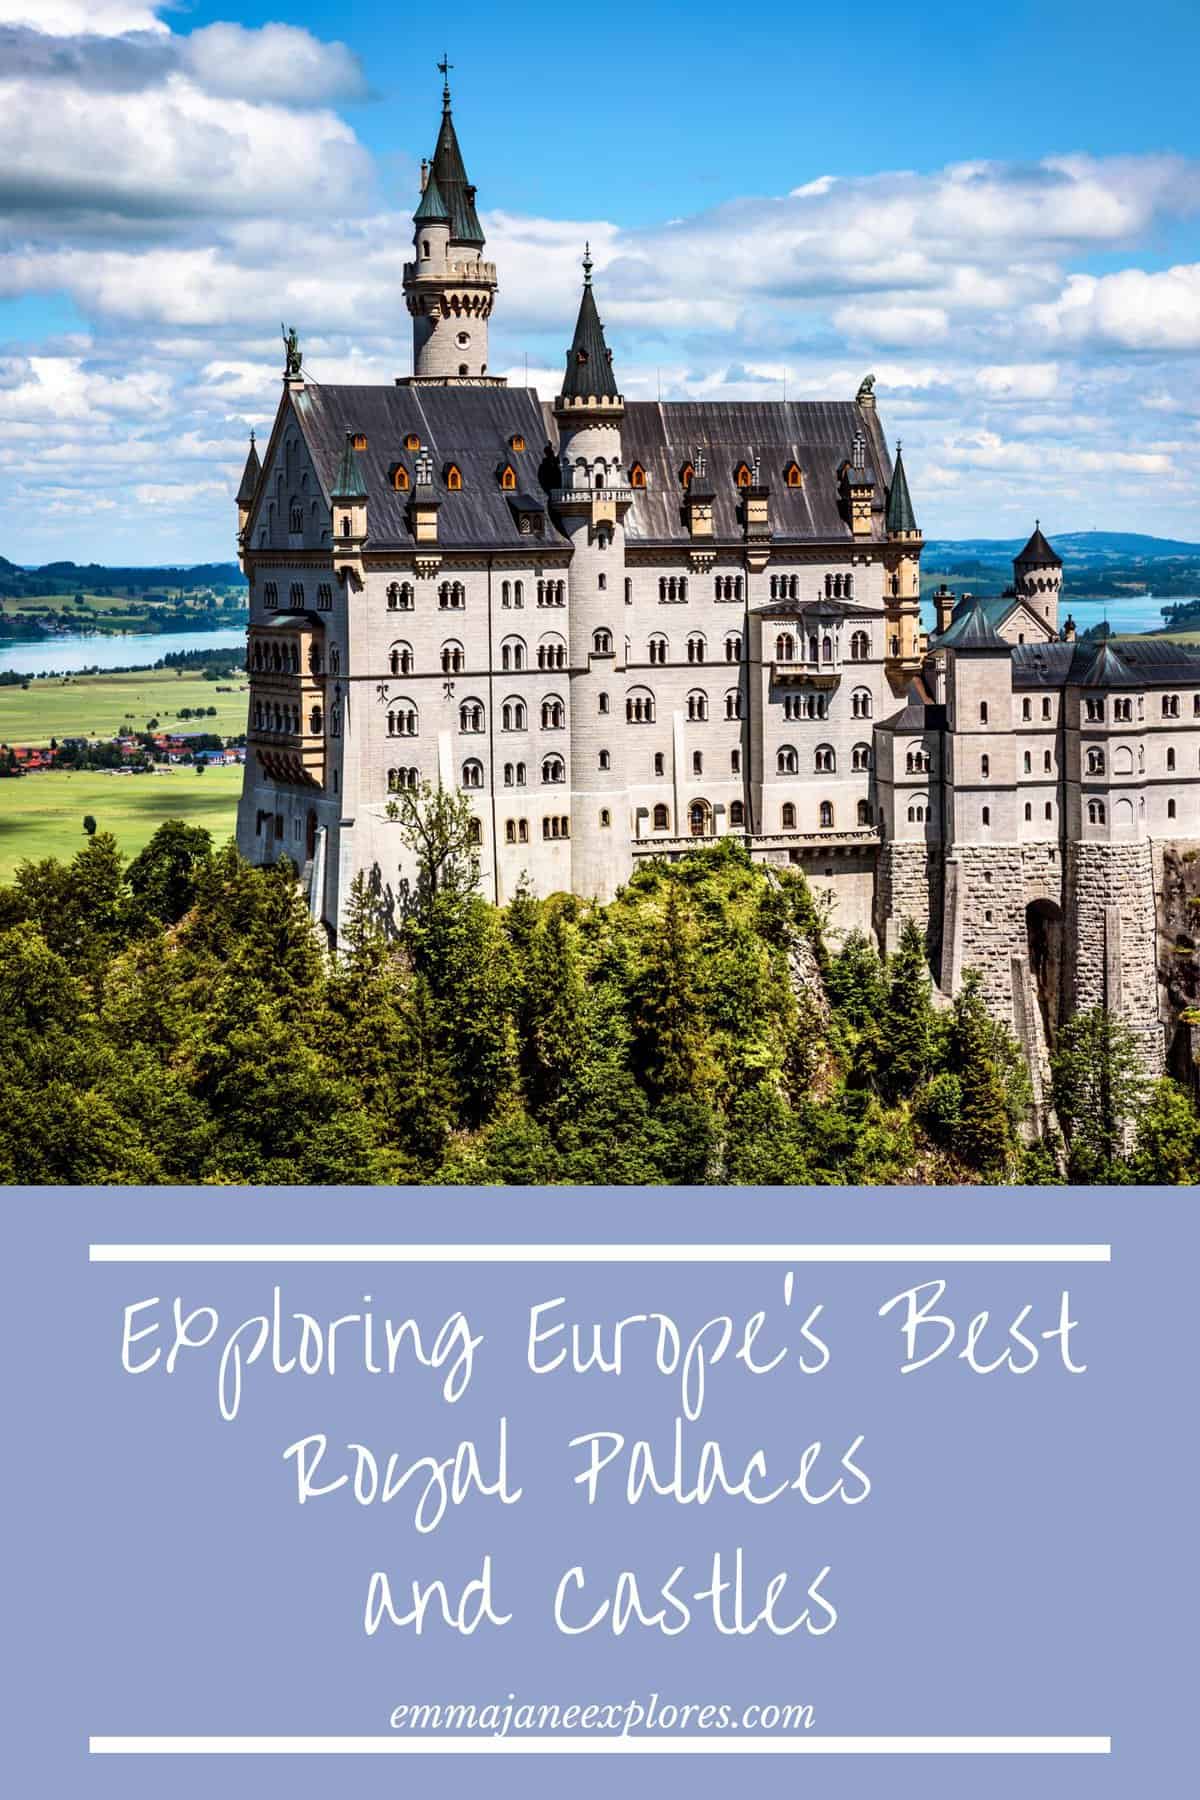 Exploring Europe's Royal Palaces and Castles - Emma Jane Explores